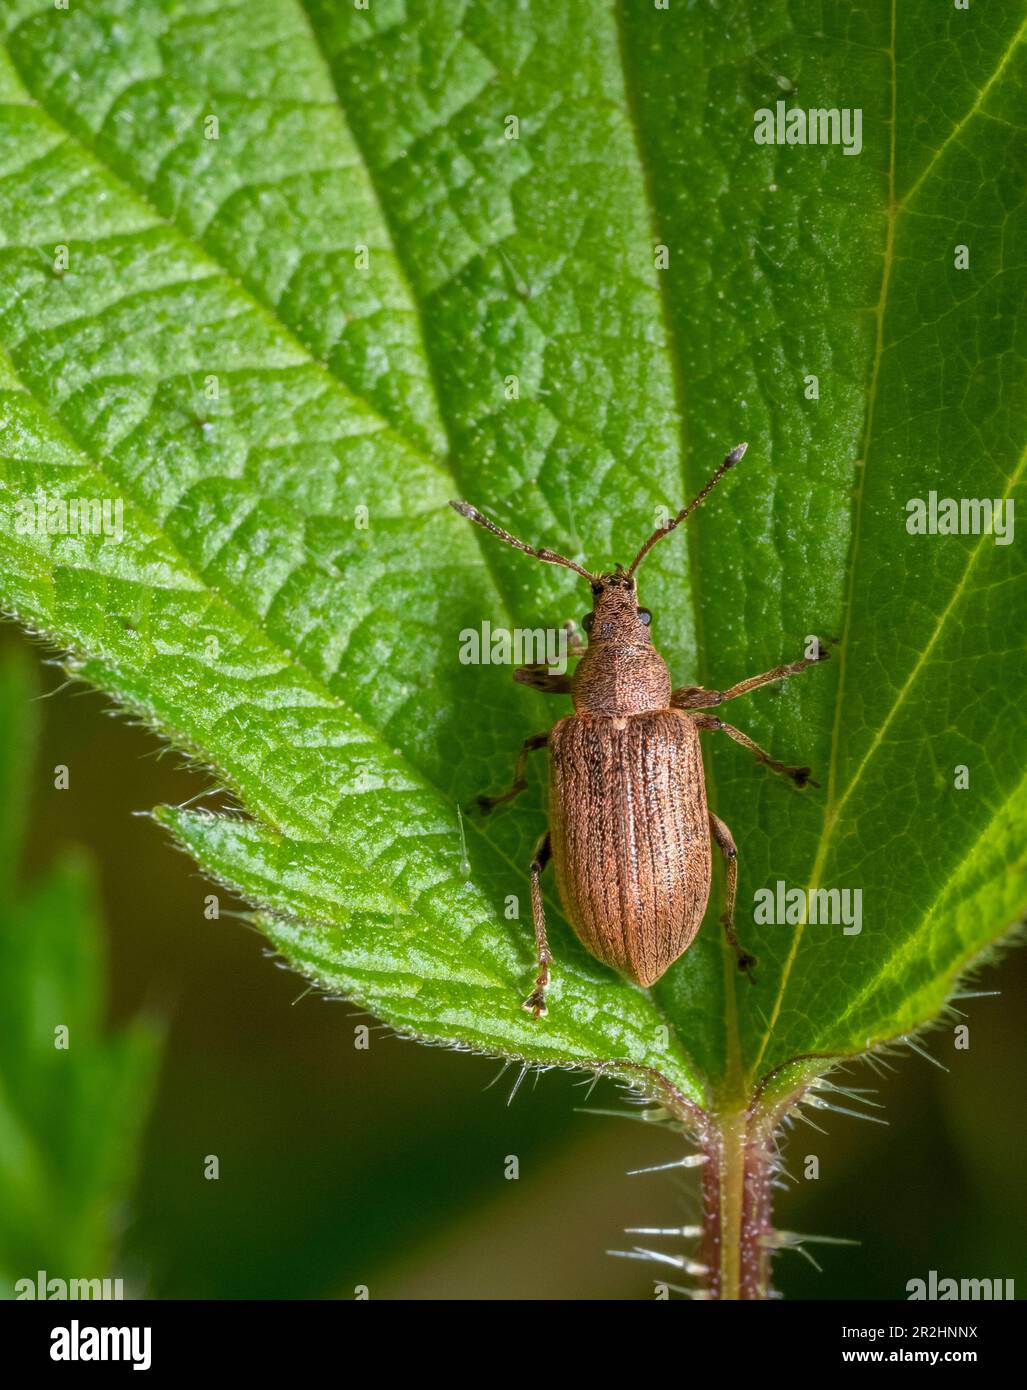 Common leaf weevil on a green nettle leaf in natural ambiance Stock Photo